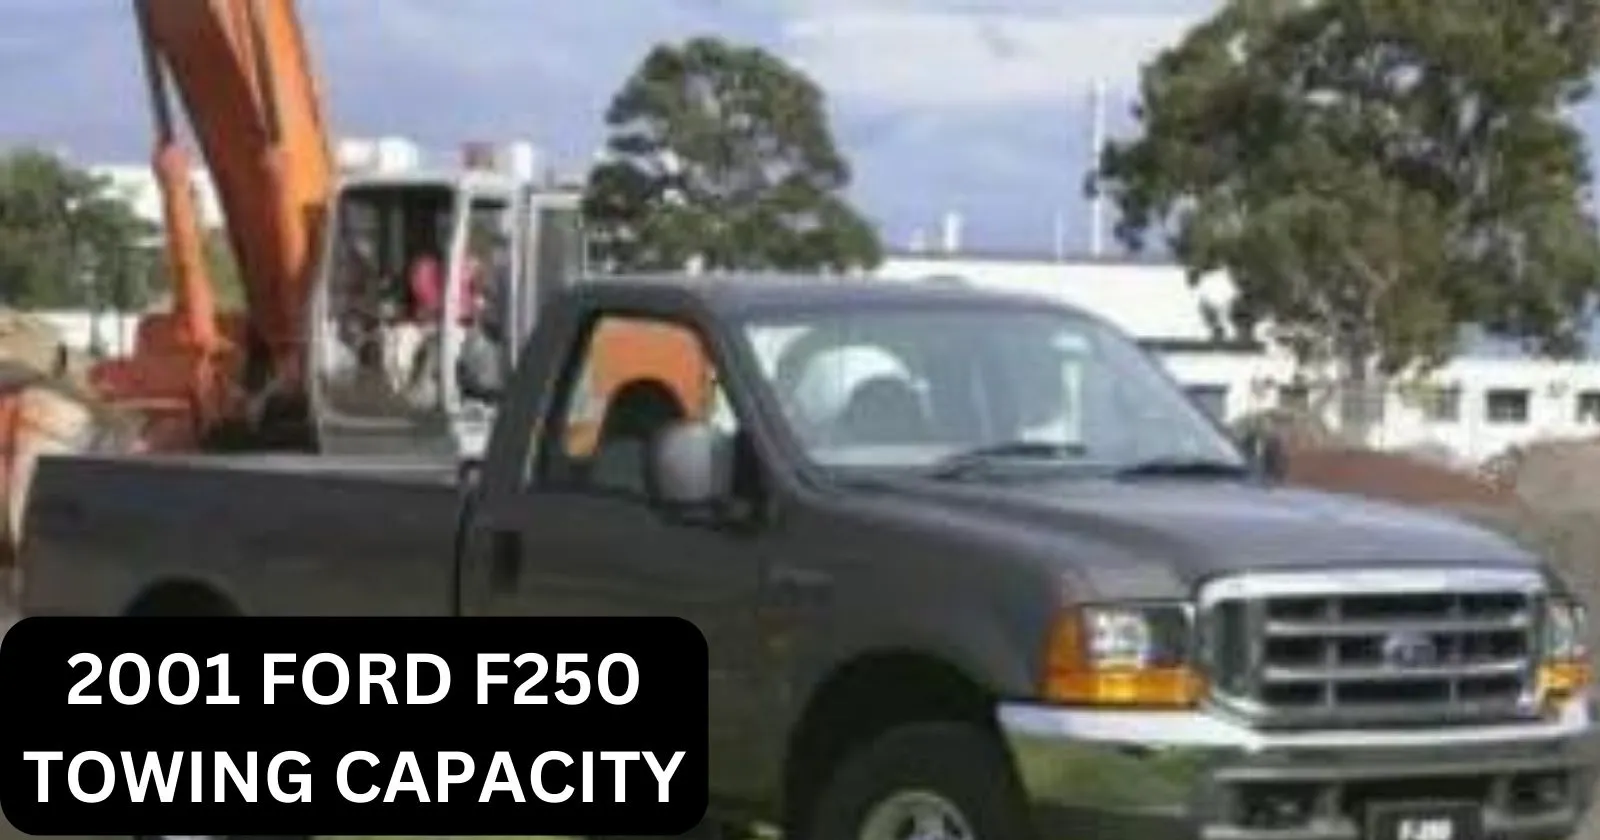 explore-2001-ford-f250-towing-capacity-with-charts-thecartowing